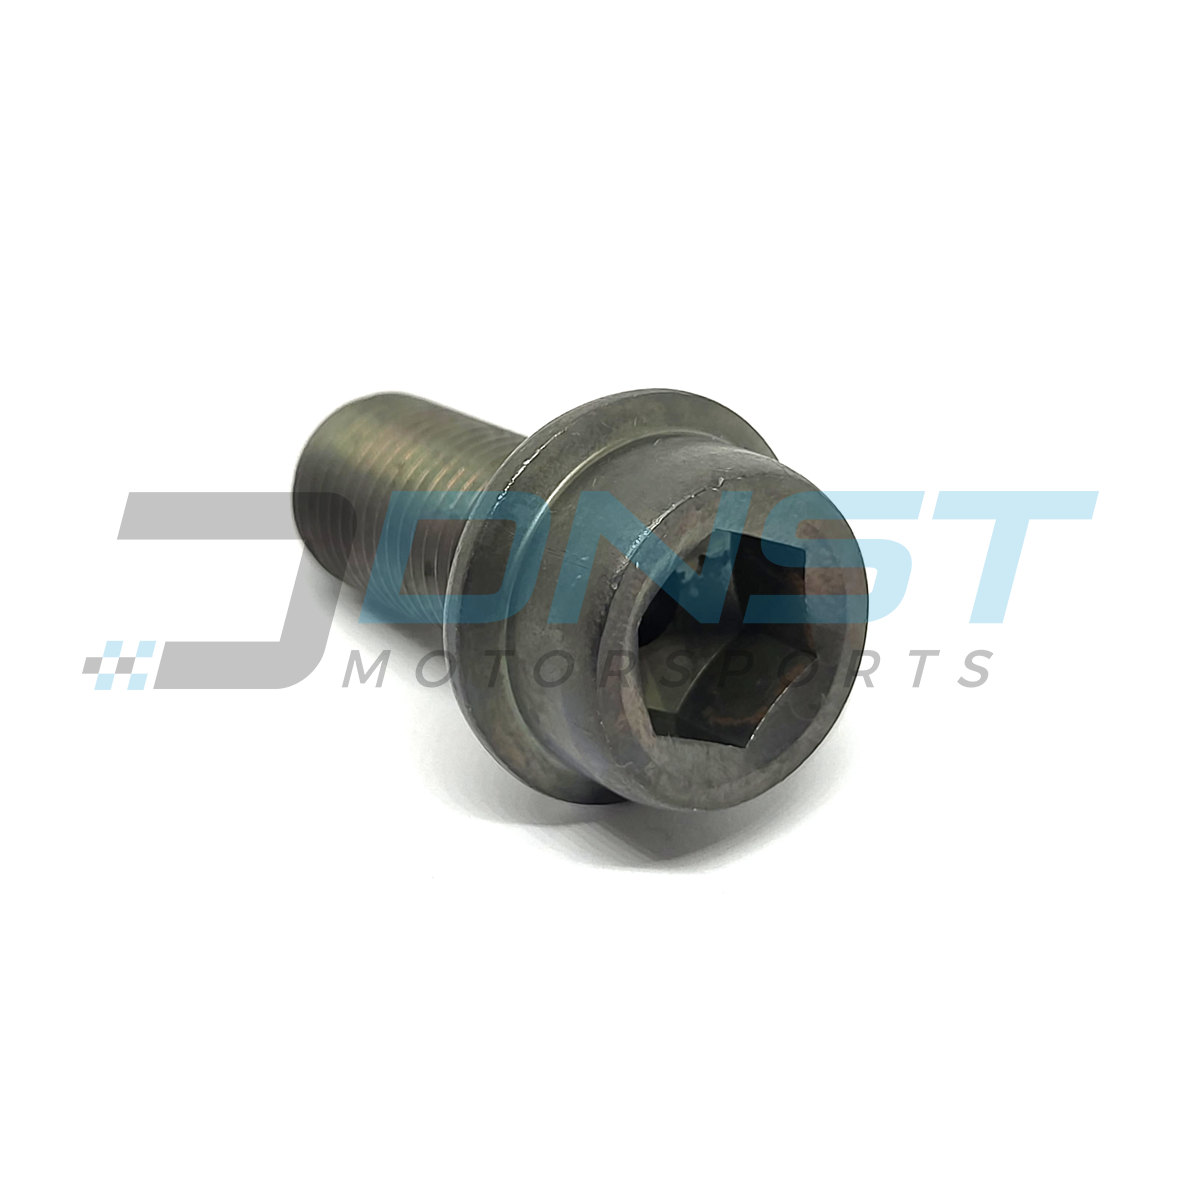 a hex headed steel threaded bolt on a white background and a DNST Motorsports watermark